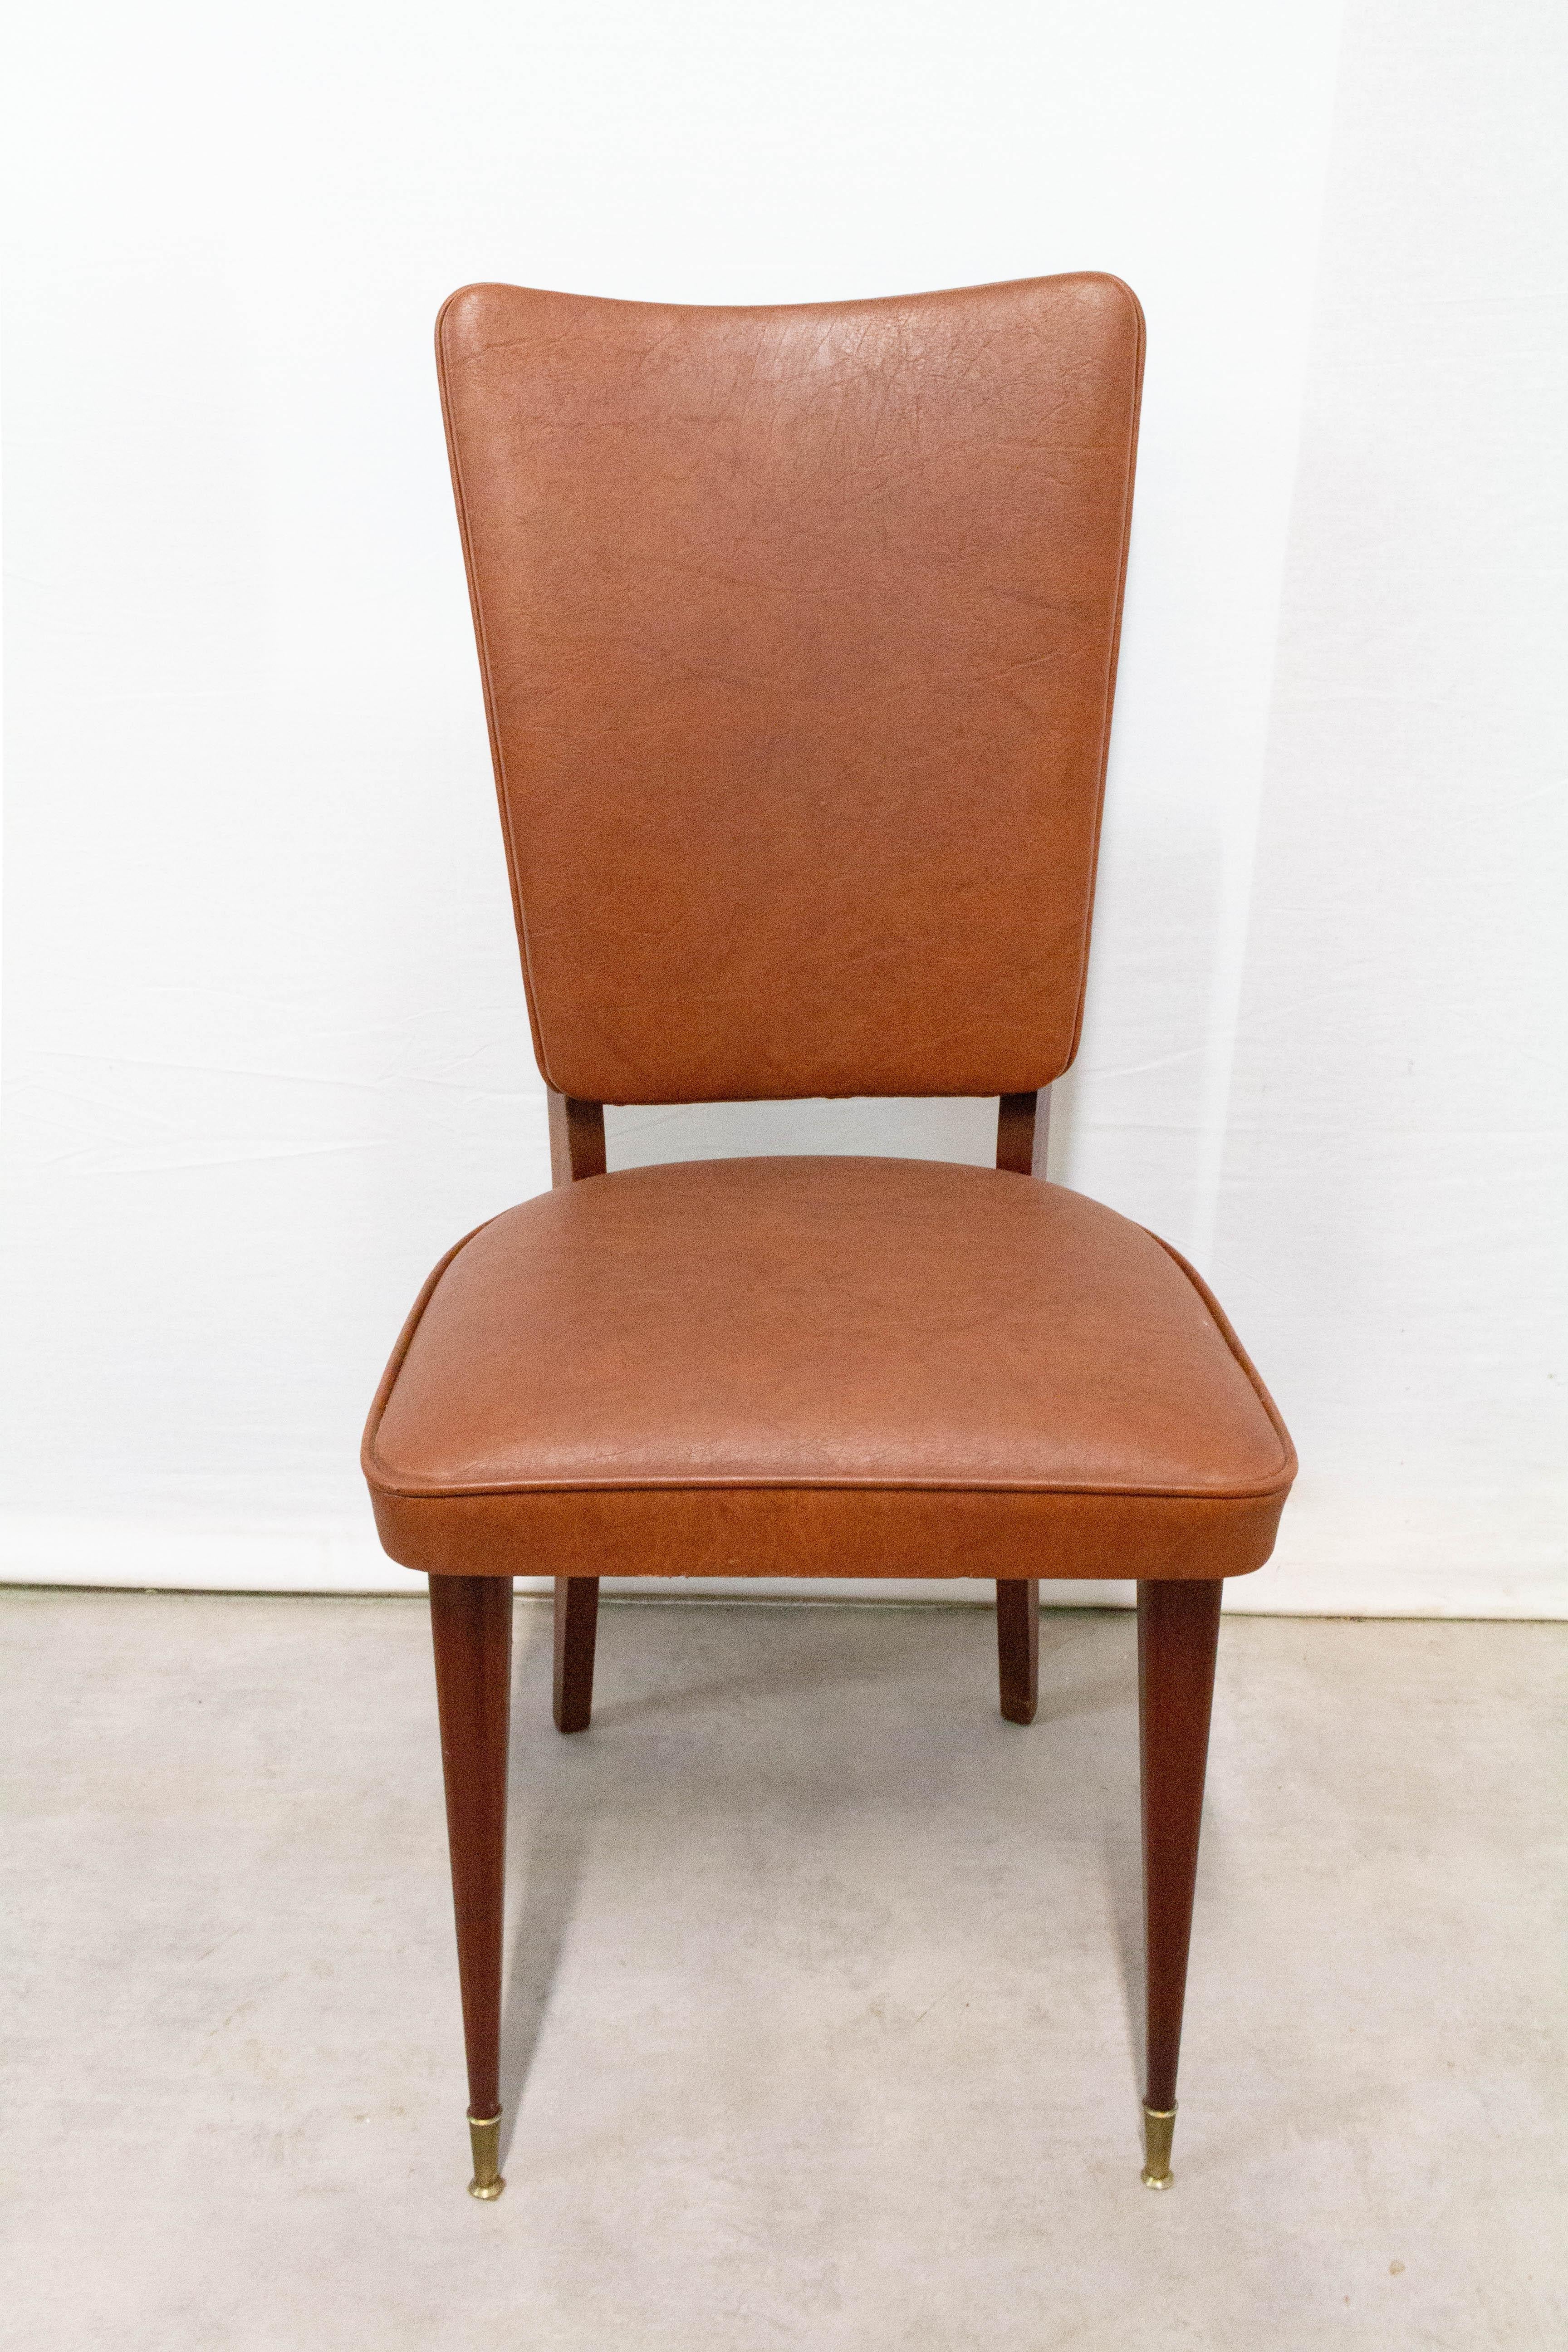 Set of six French dining chairs circa 1960 
Brown skai and iroko wood legs
In good vintage condition solid and sound.

For shipping: 
3 packs: 43/67/95 cm 14kg each.